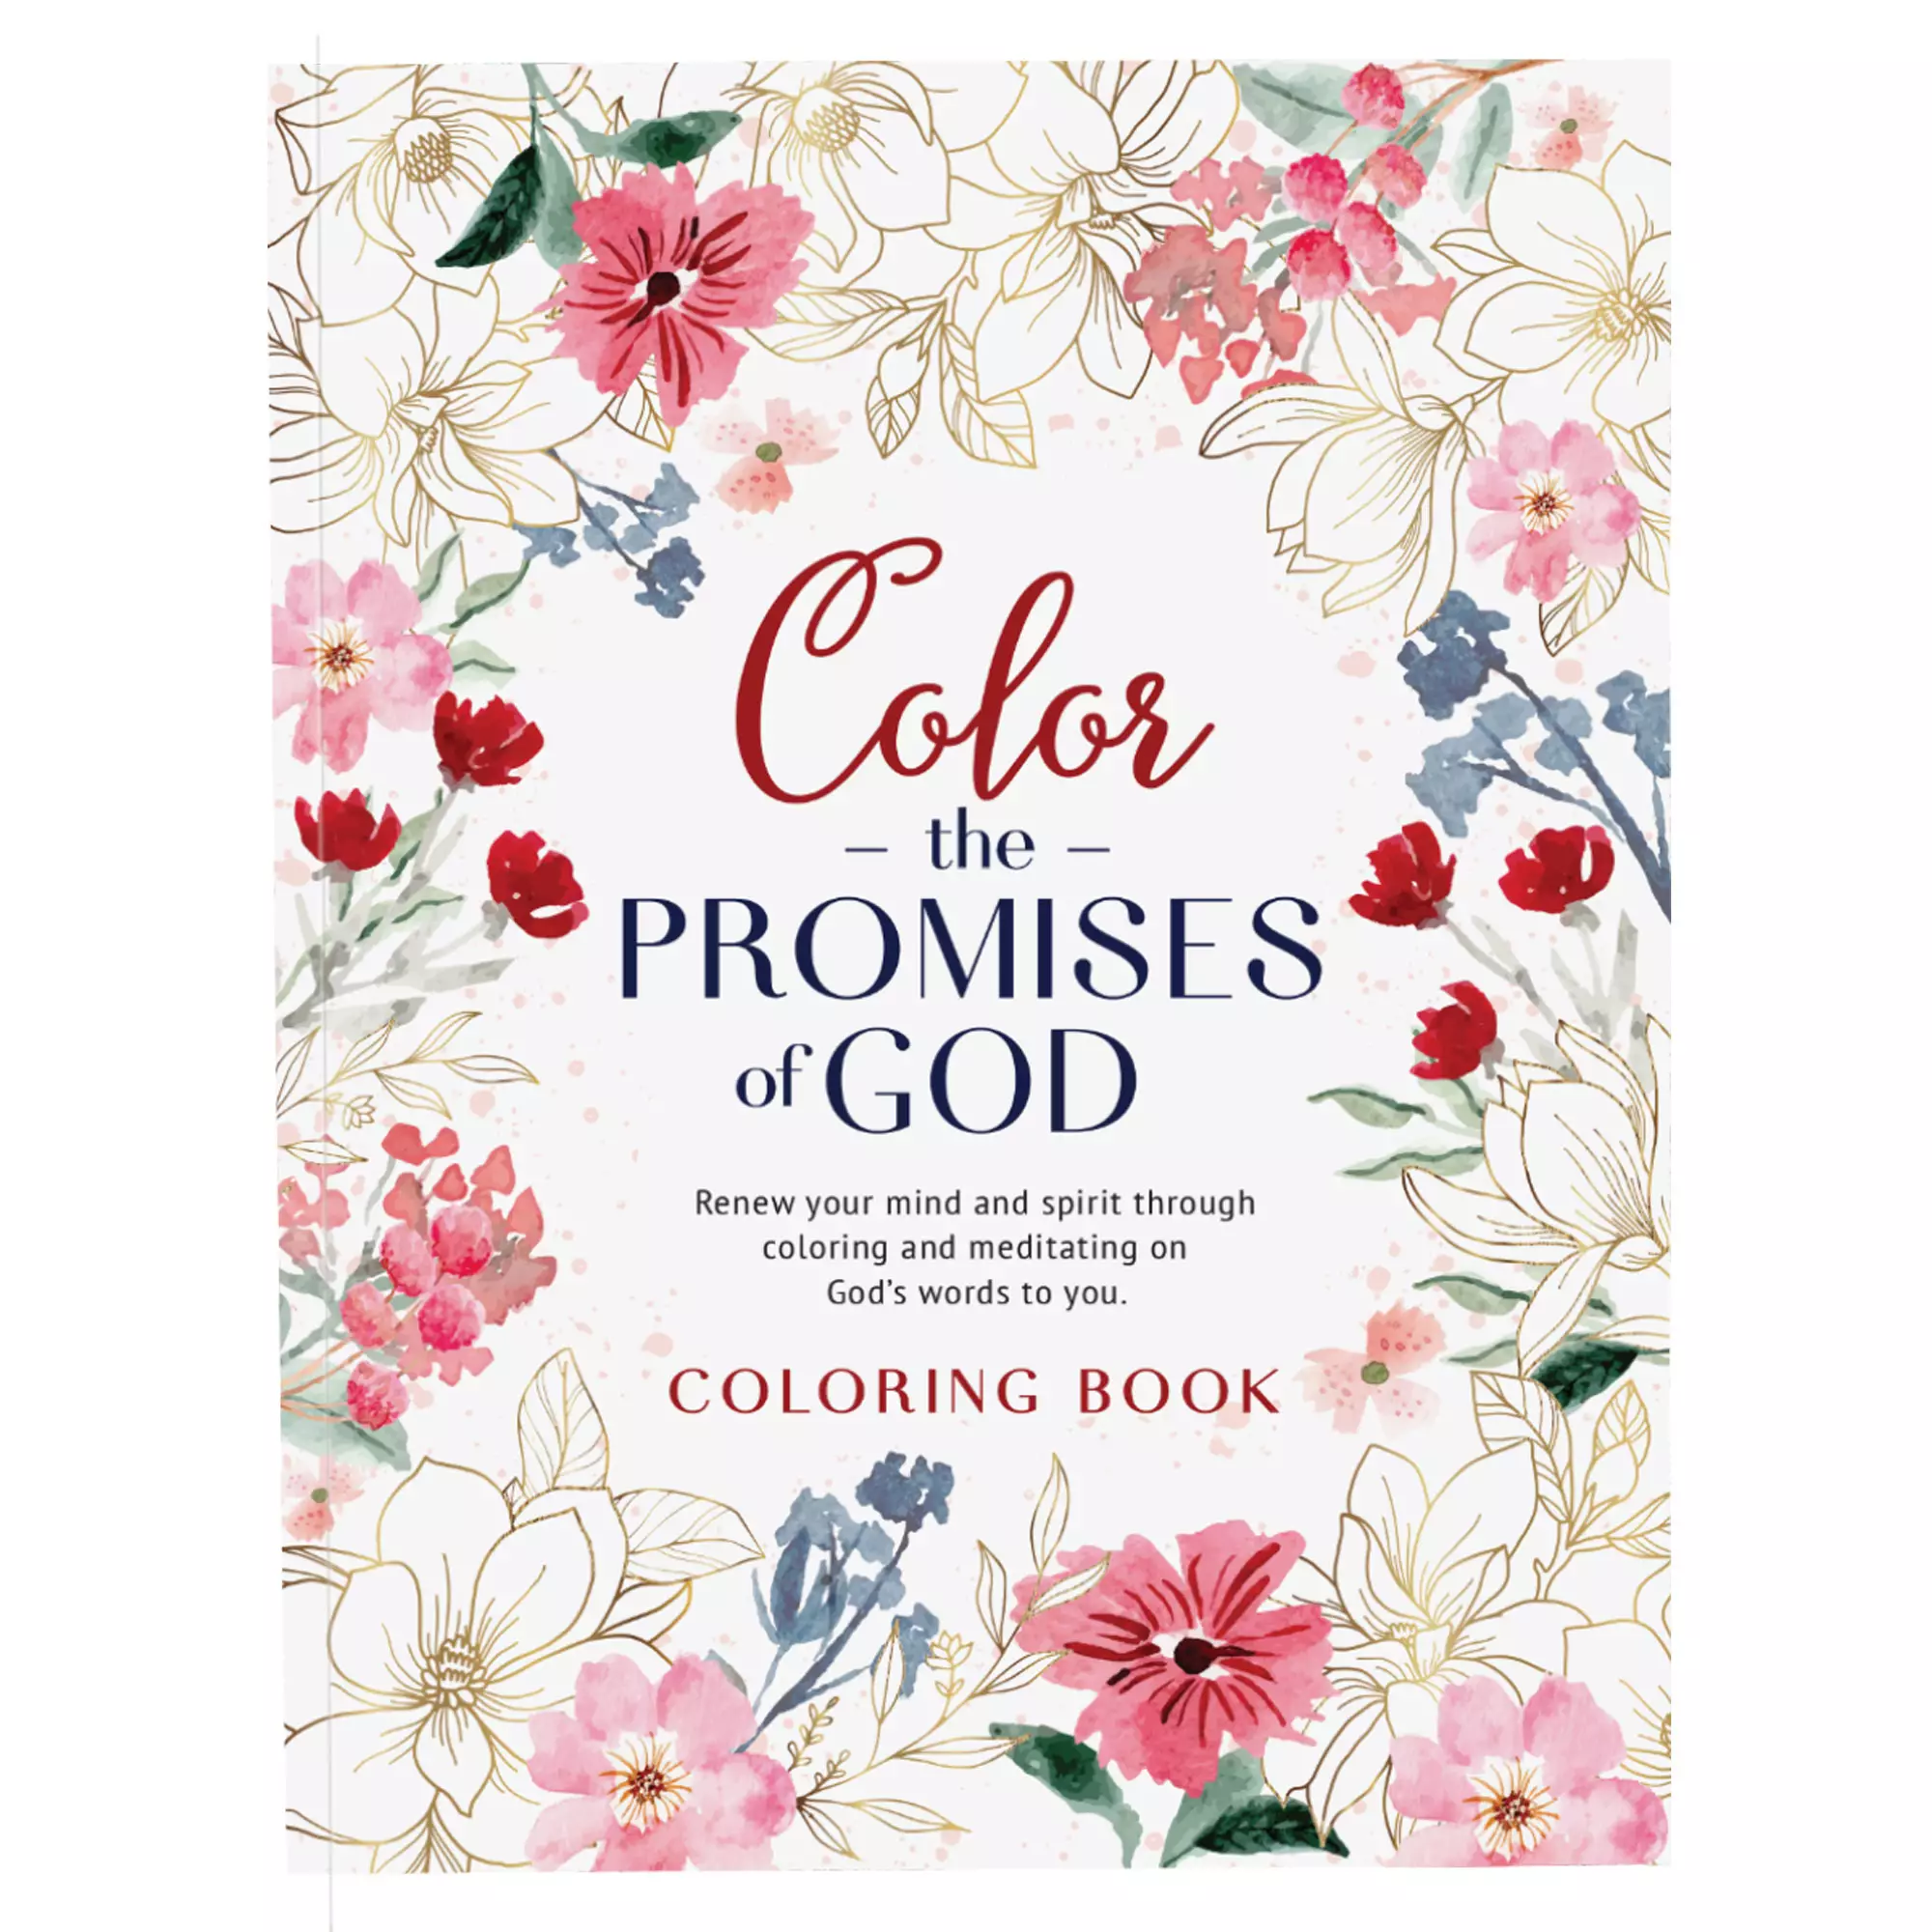 Coloring Book Color the Promises of God